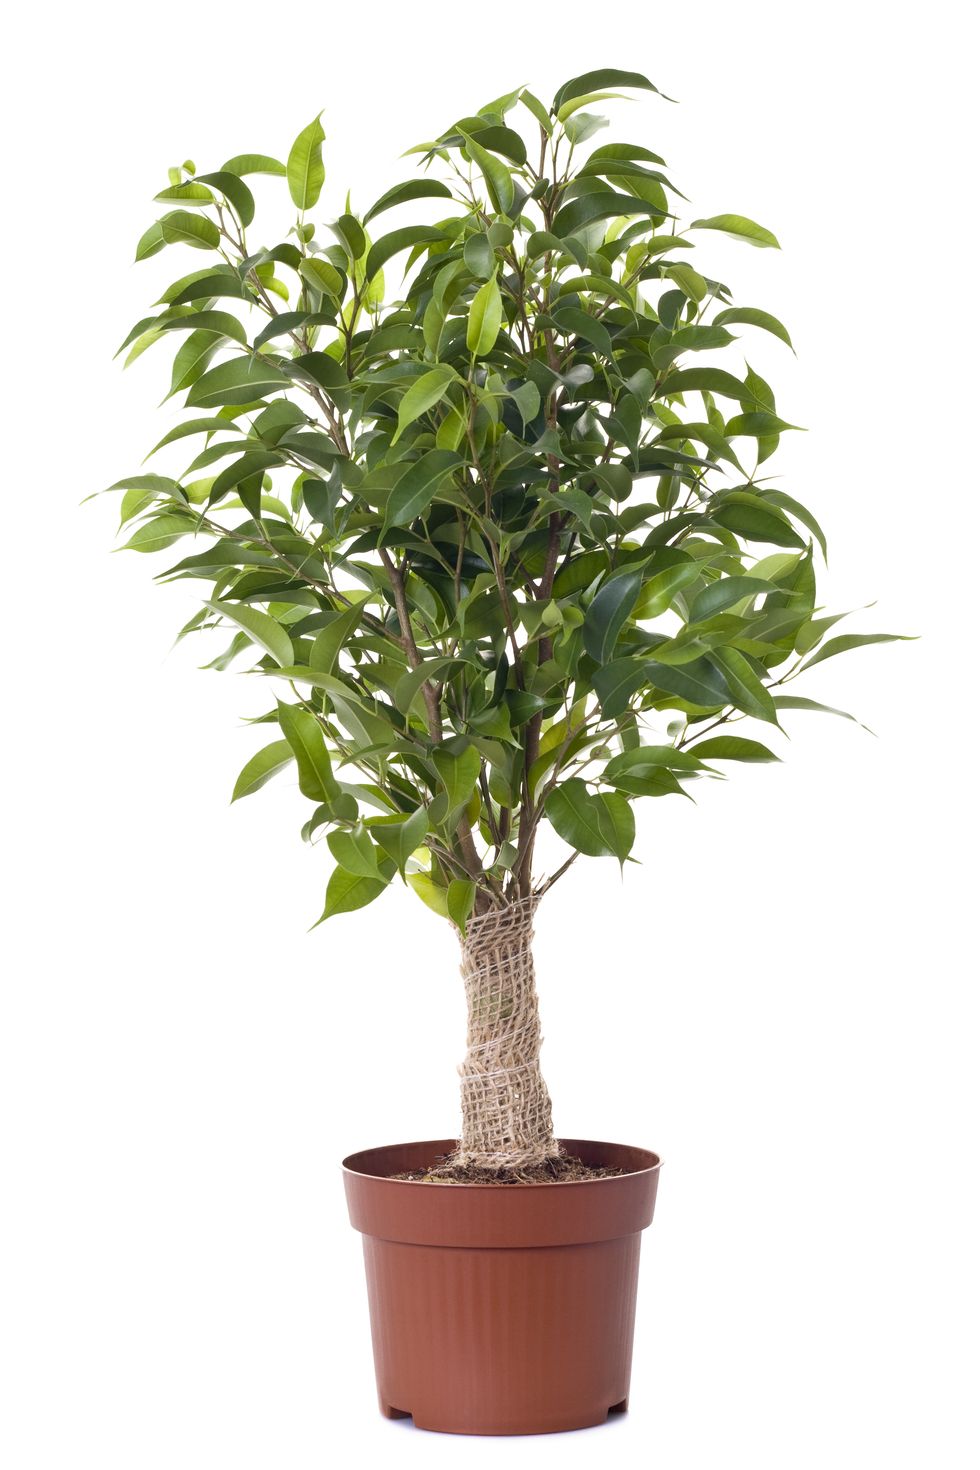 a small ficus tree planted in a brown clay pot